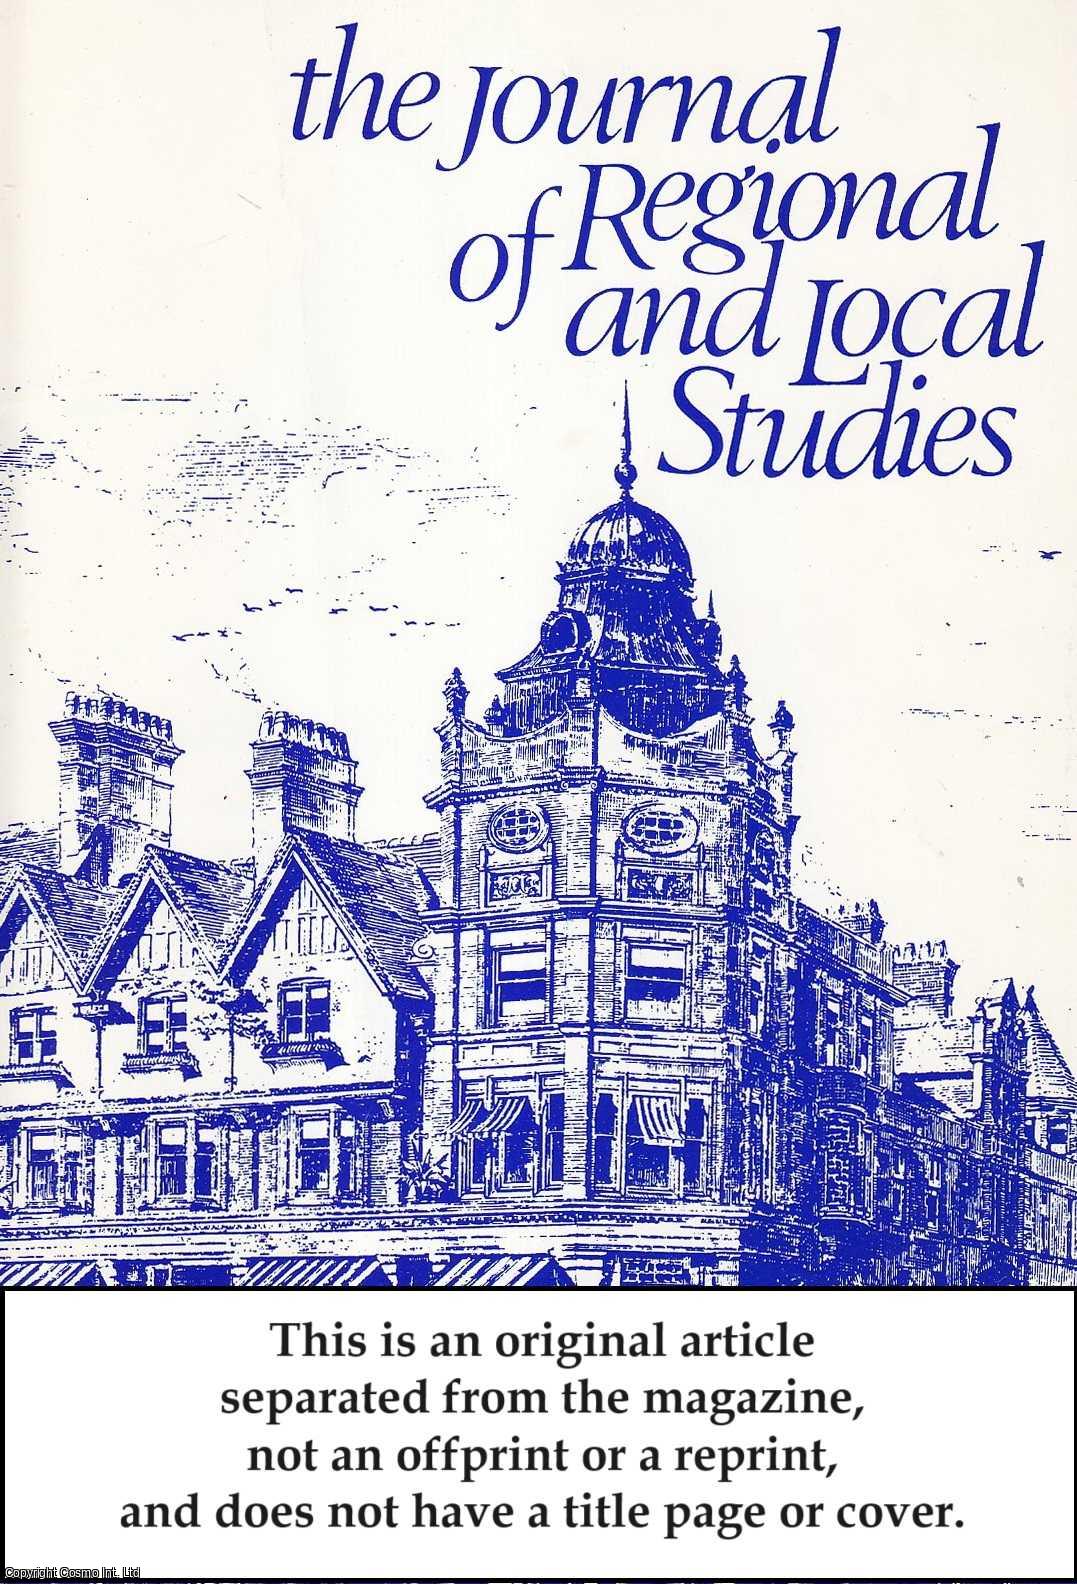 Barry Stapleton - Sources for The Demographic Study of a Local Community from The Sixteenth to The Mid Nineteenth Century. An original article from Journal of Regional & Local Studies, 1984.